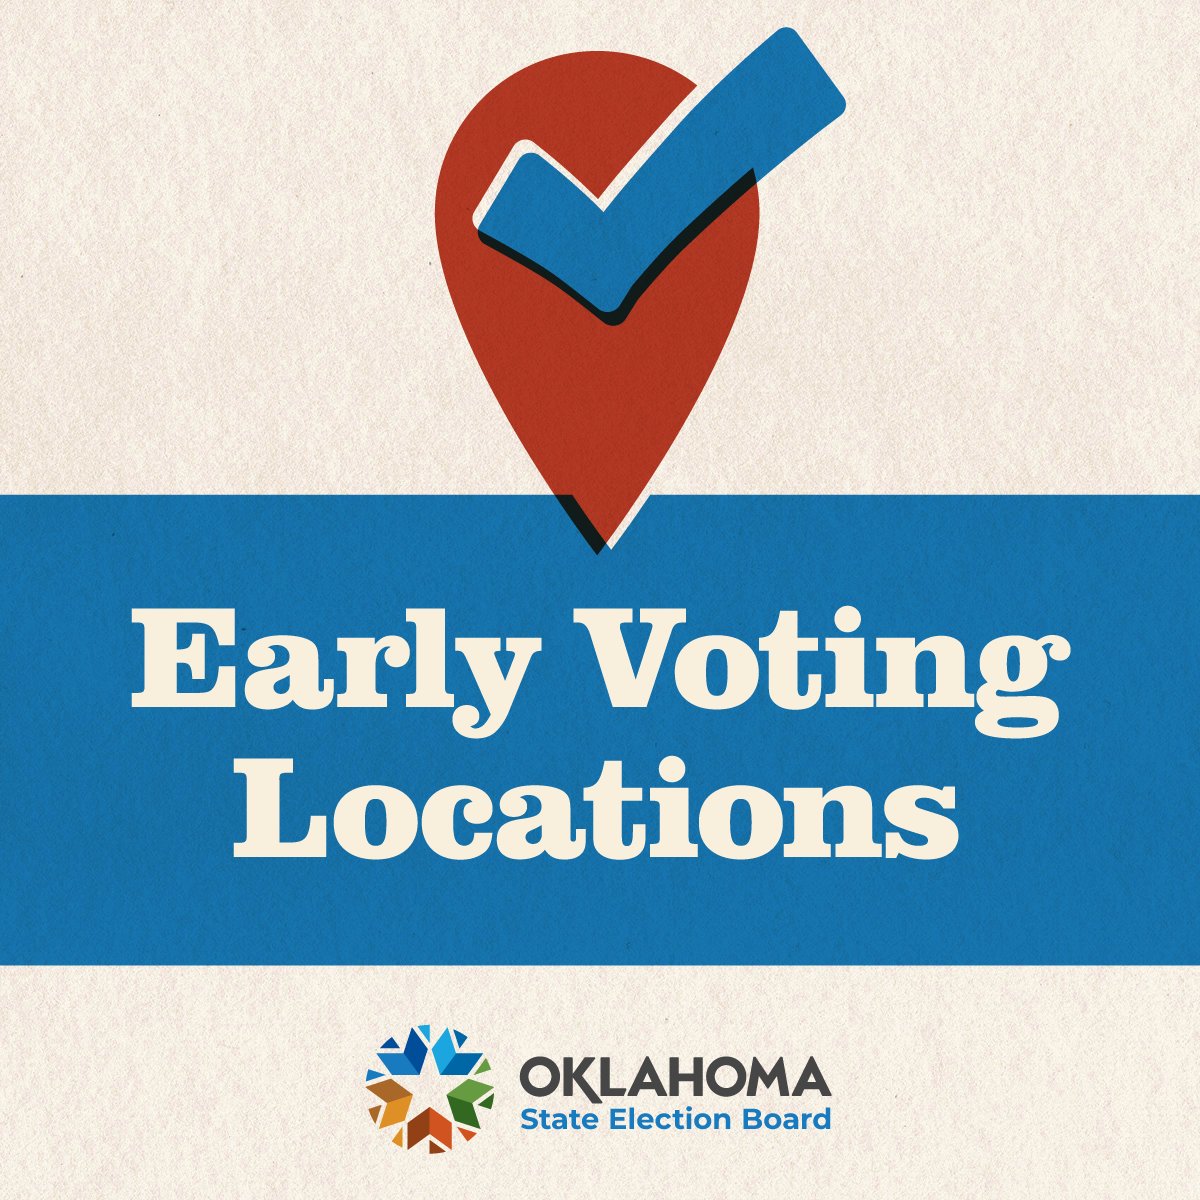 REMINDER: Early voting starts tomorrow at 8 a.m.! No excuse is needed, but you must vote in the county where you are registered to vote. Get a sample ballot: oklahoma.gov/elections/ovp.… Find your early voting location/dates/times: oklahoma.gov/elections/vote…